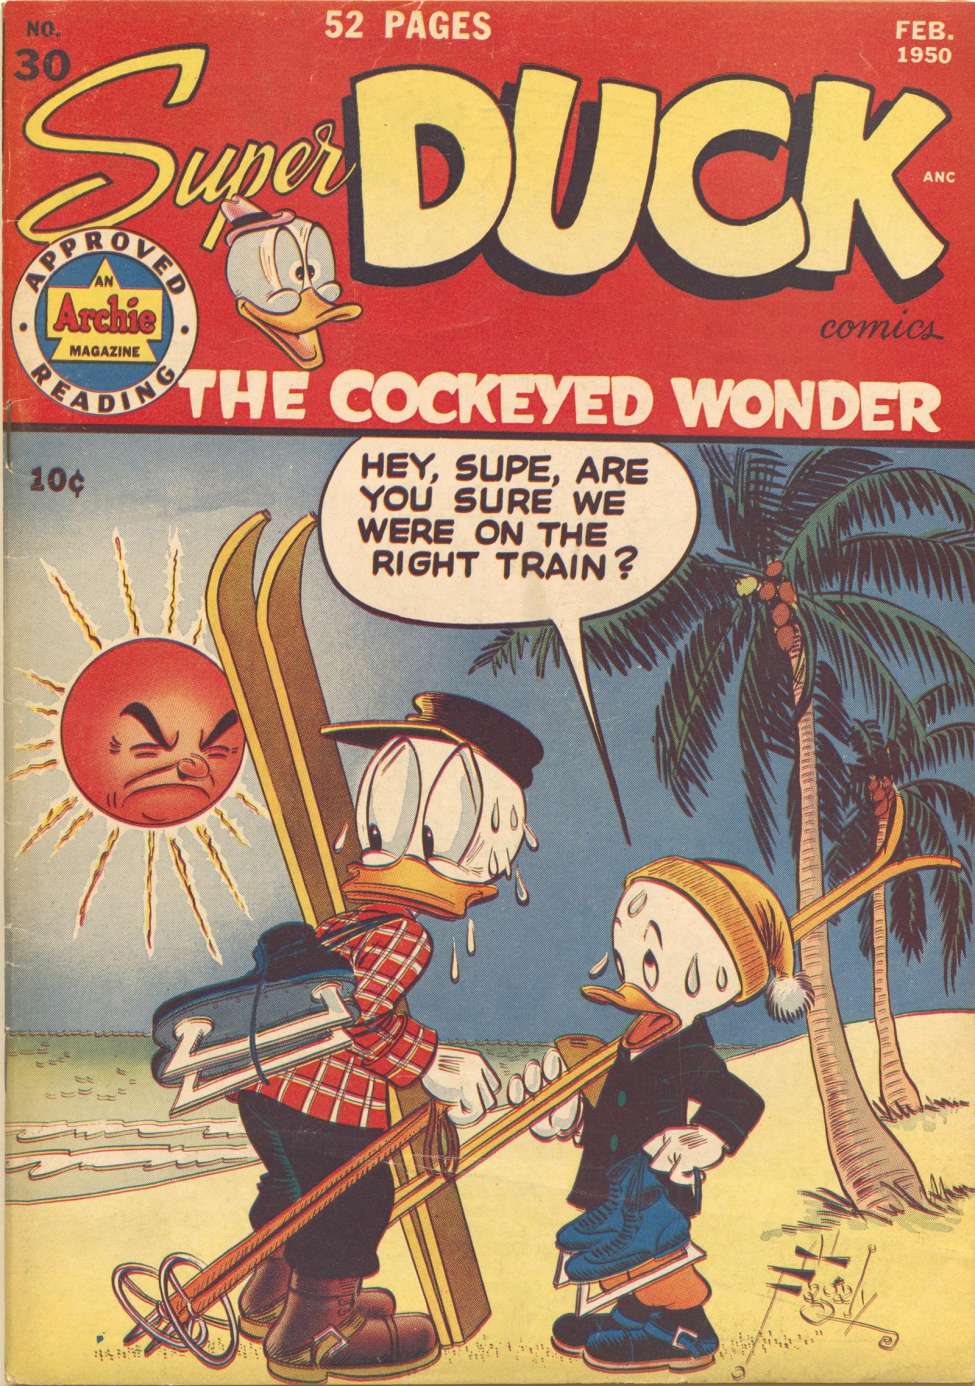 Book Cover For Super Duck 30